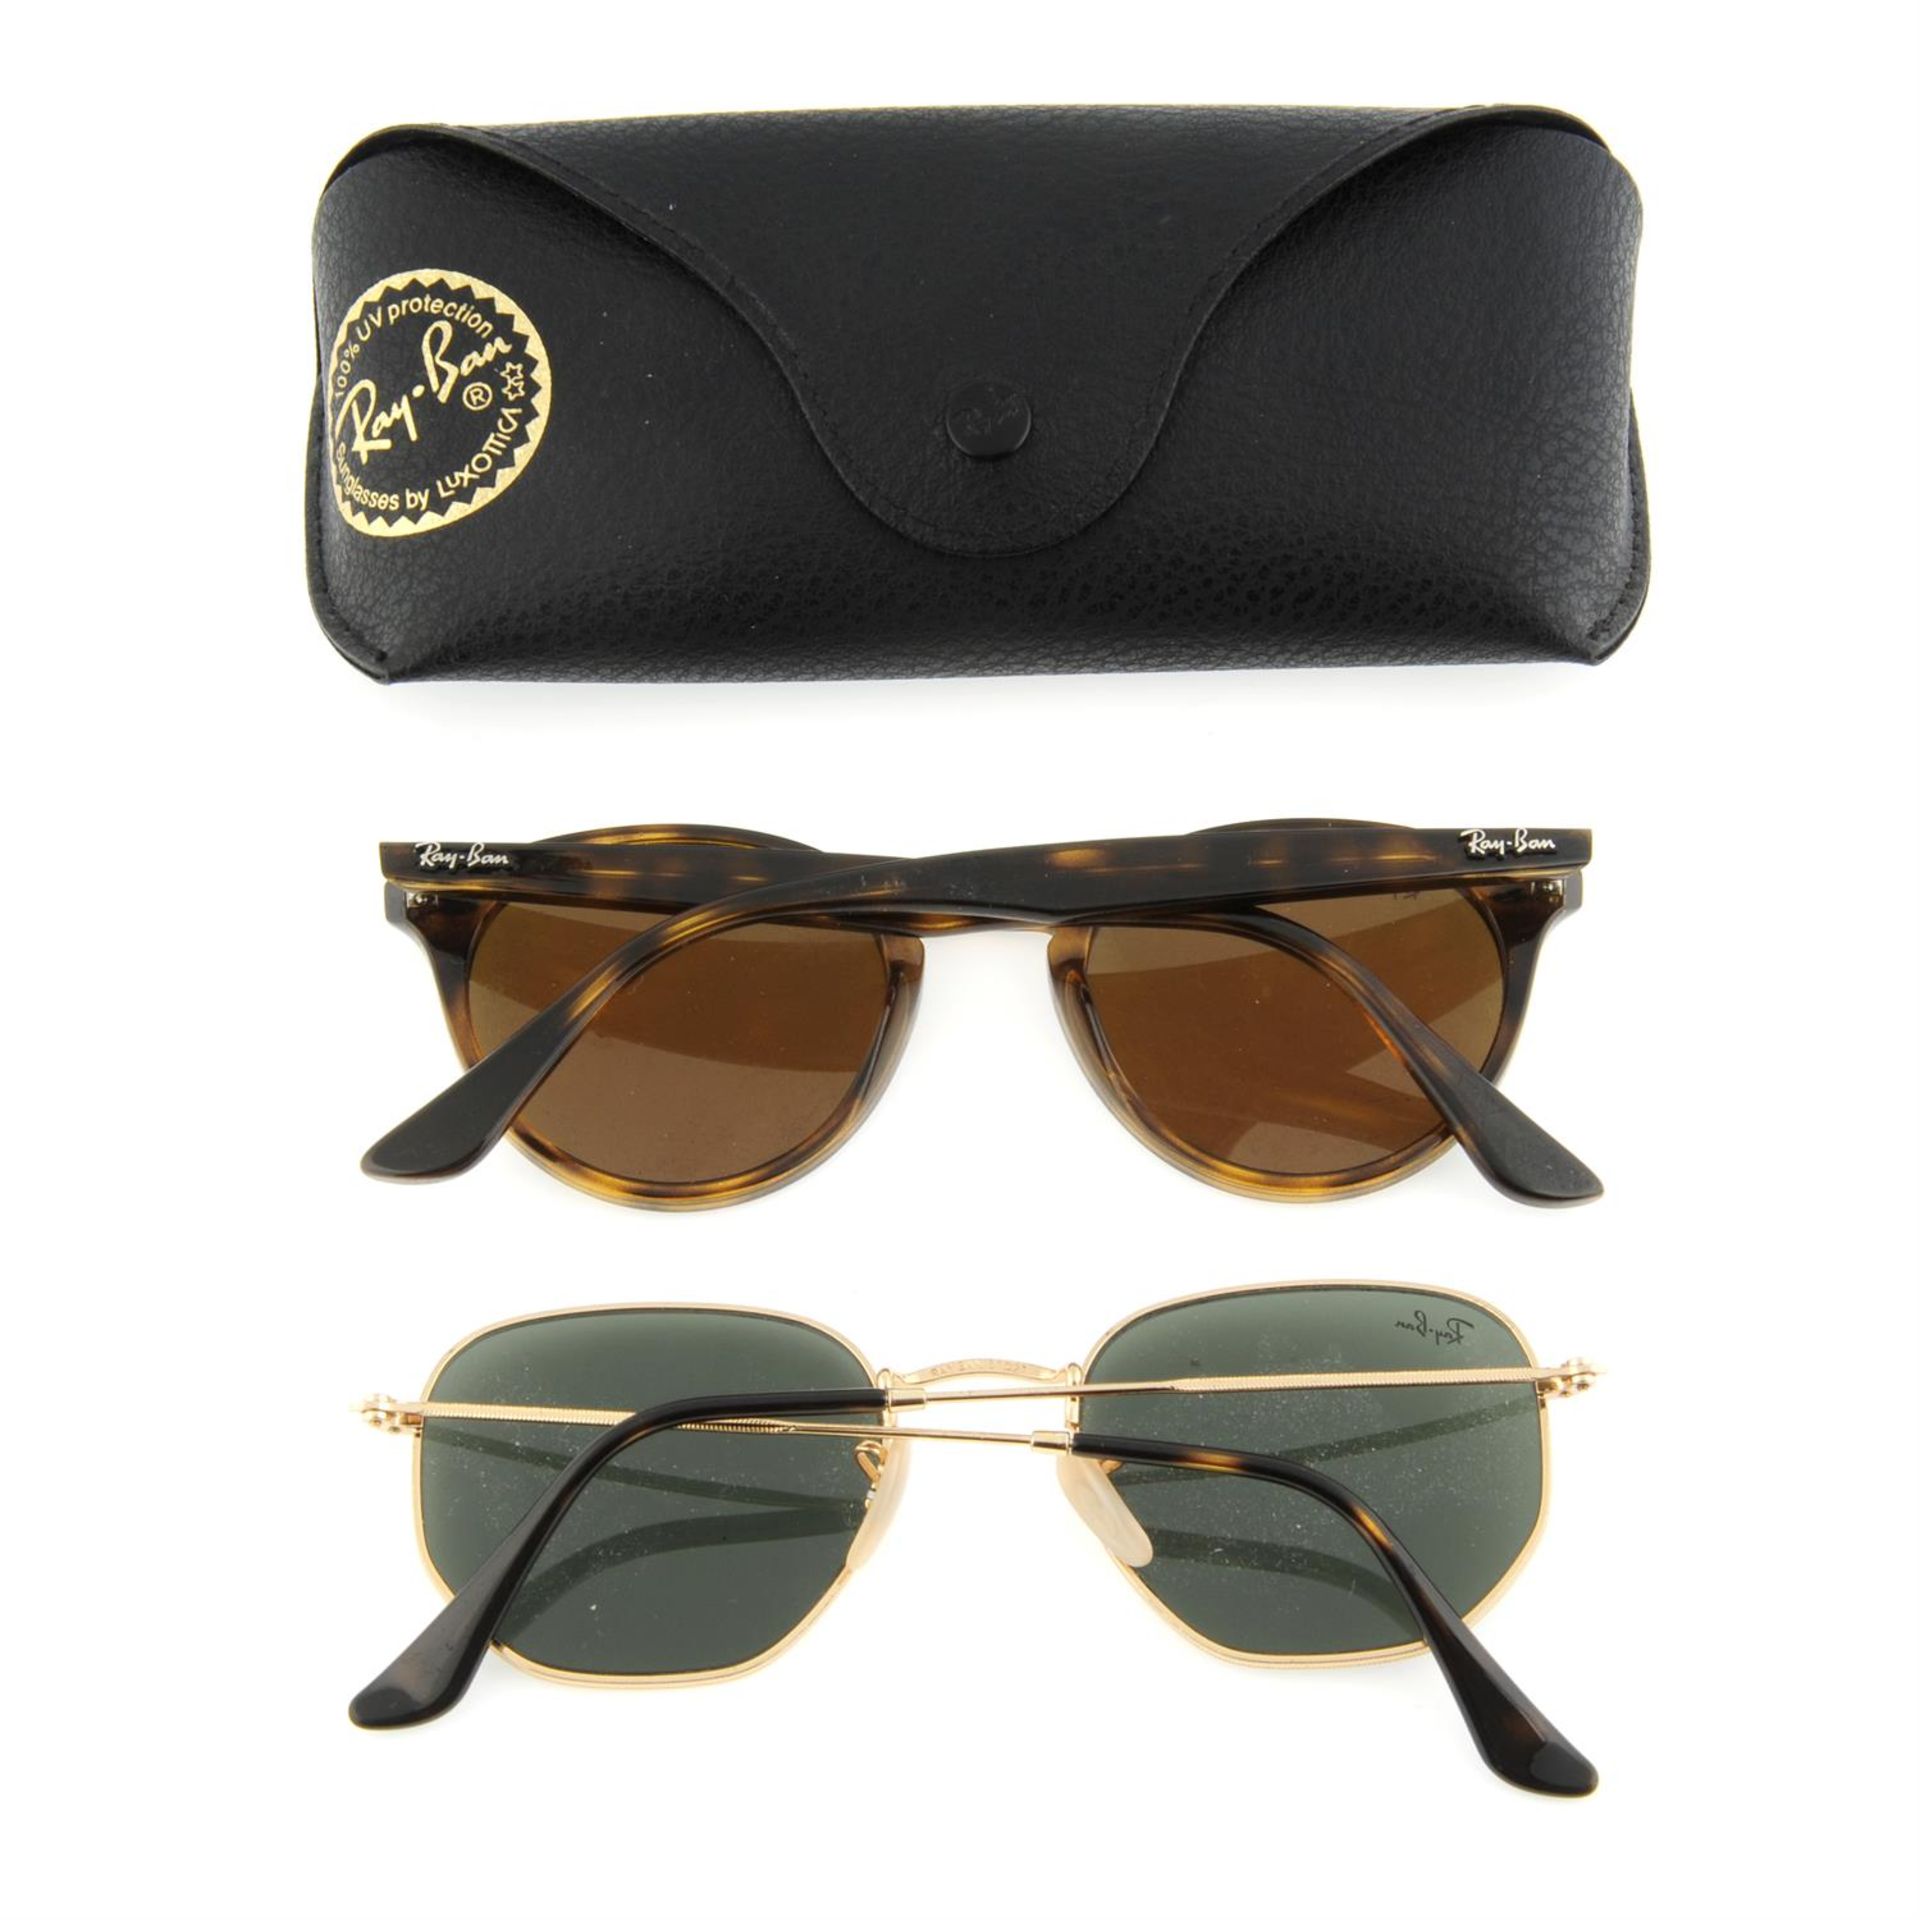 RAY-BAN - two pairs of sunglasses. - Image 2 of 2